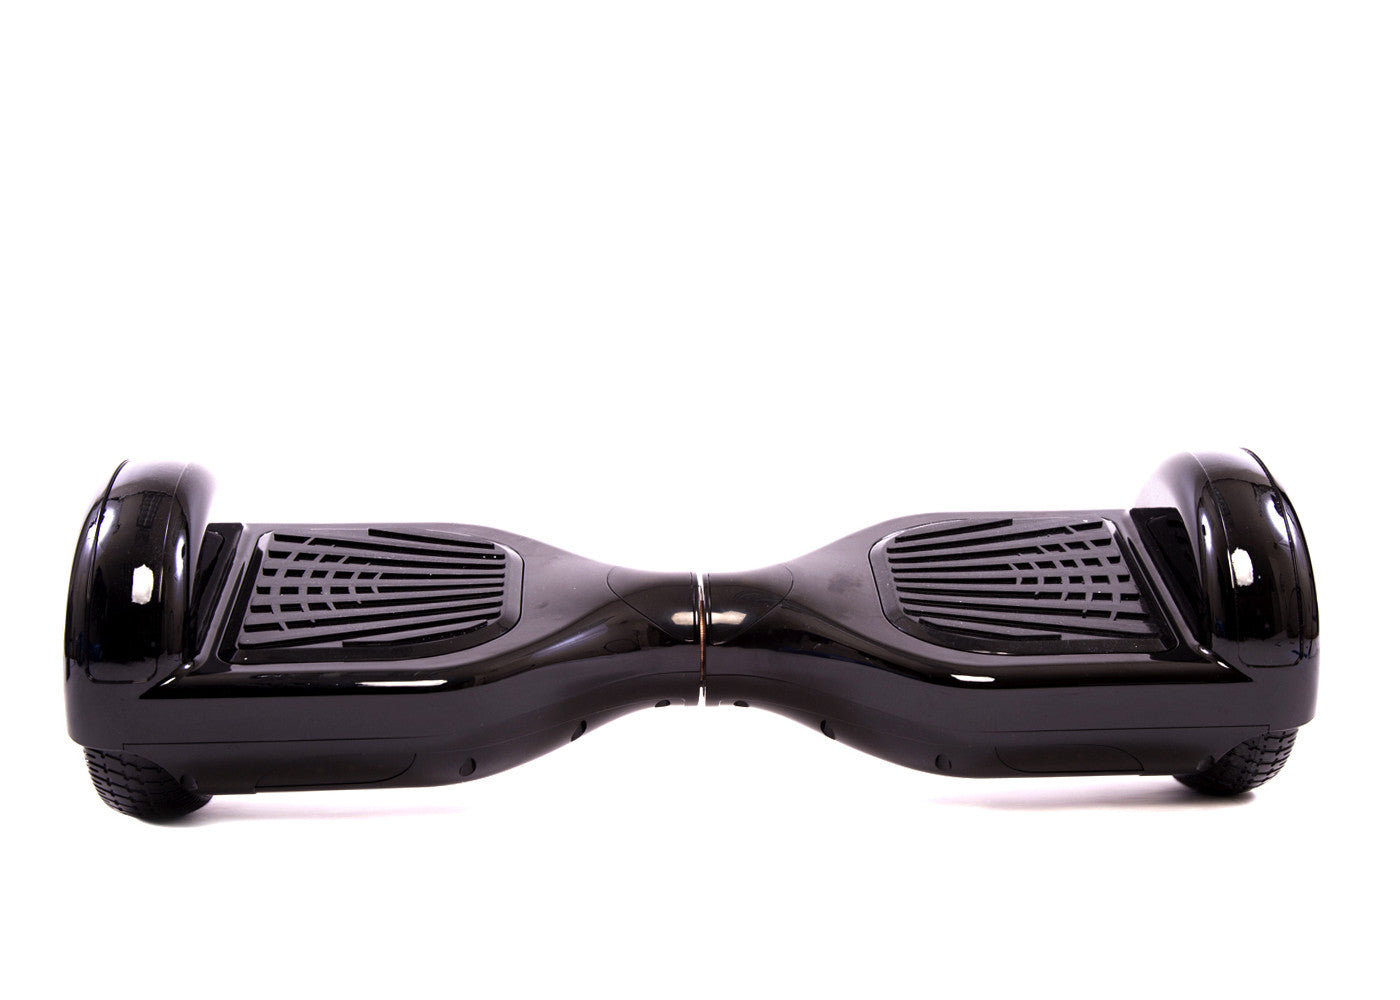 imoto 2.0 hoverboard